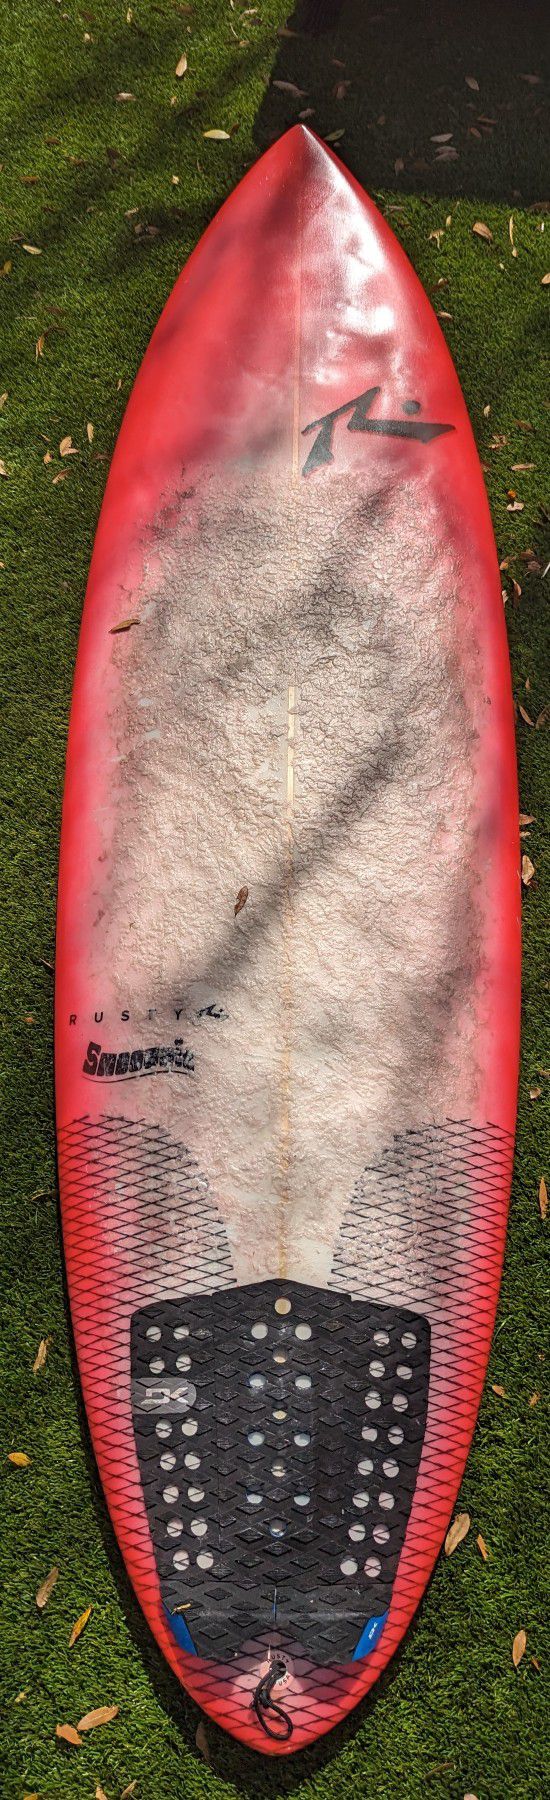 6'8" Rusty Smoothie Surfboard